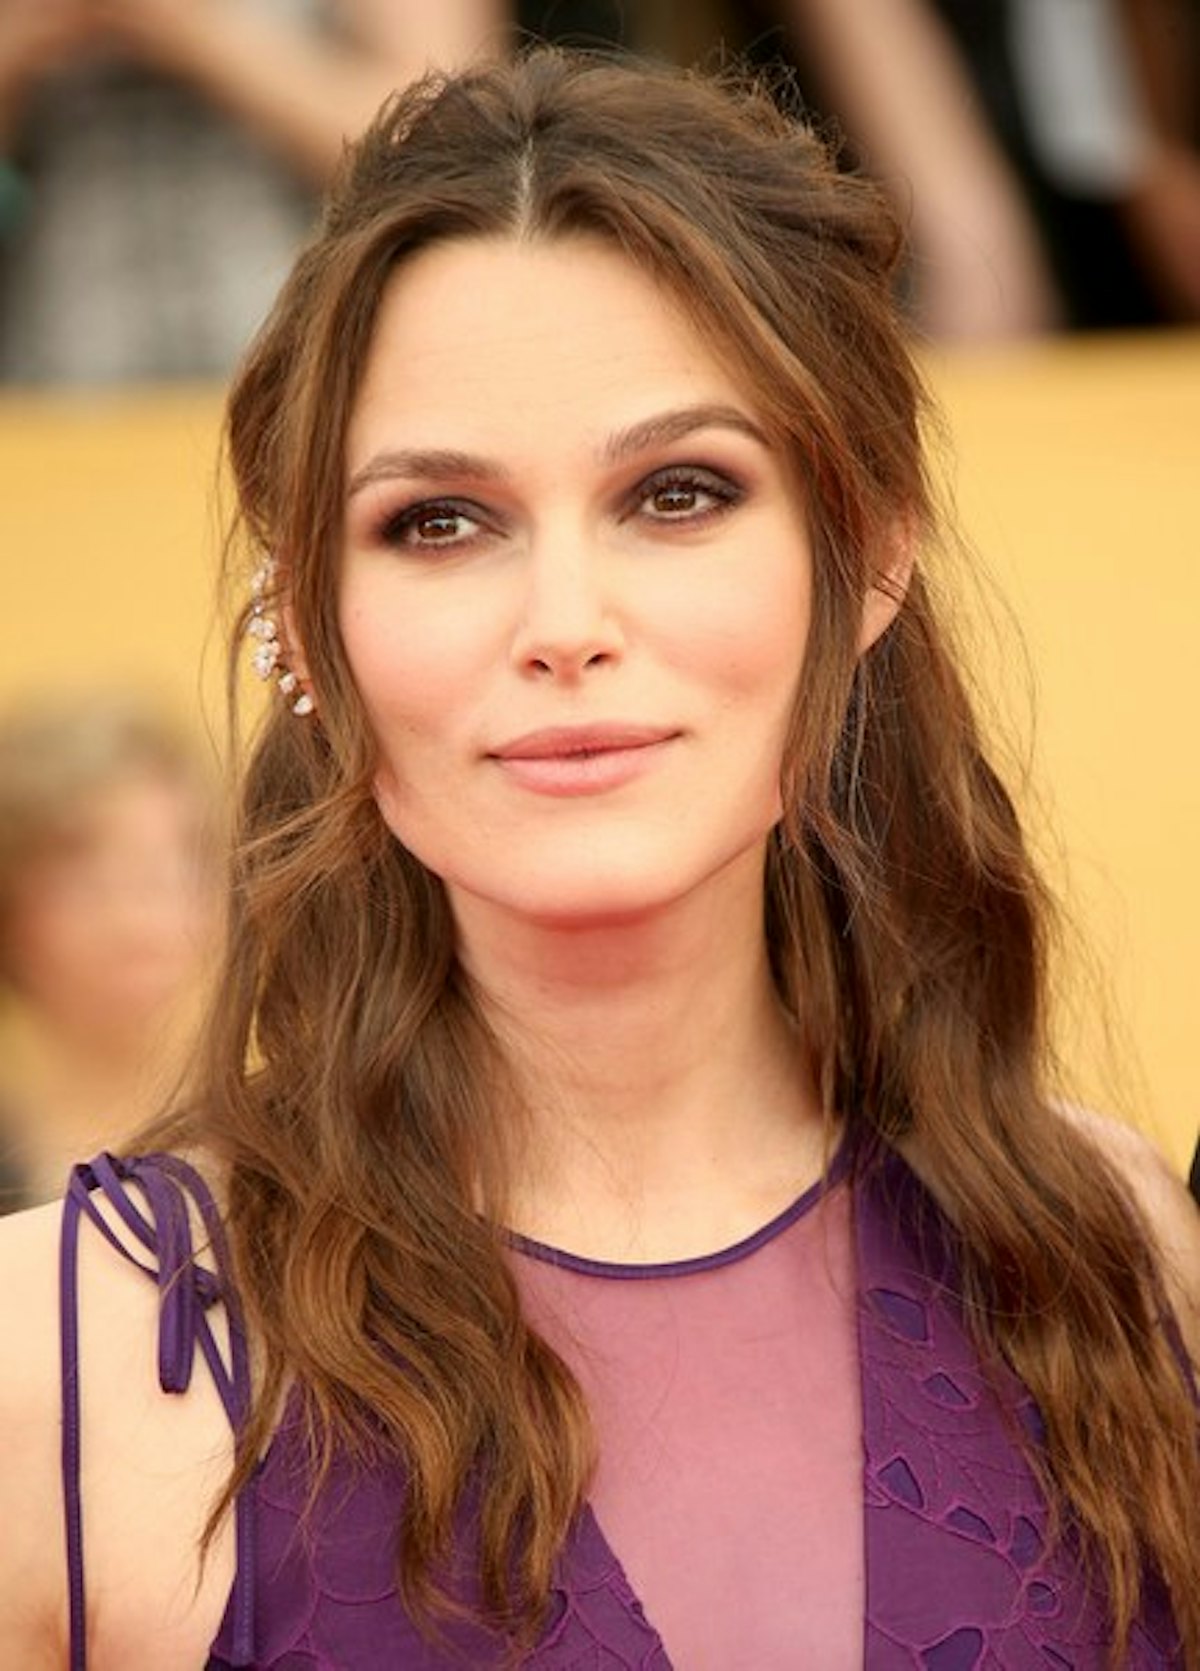 Keira Knightley Lover Of Messy Hair And A Smoky Eye Is A Master Of Effortless Red Carpet Beauty